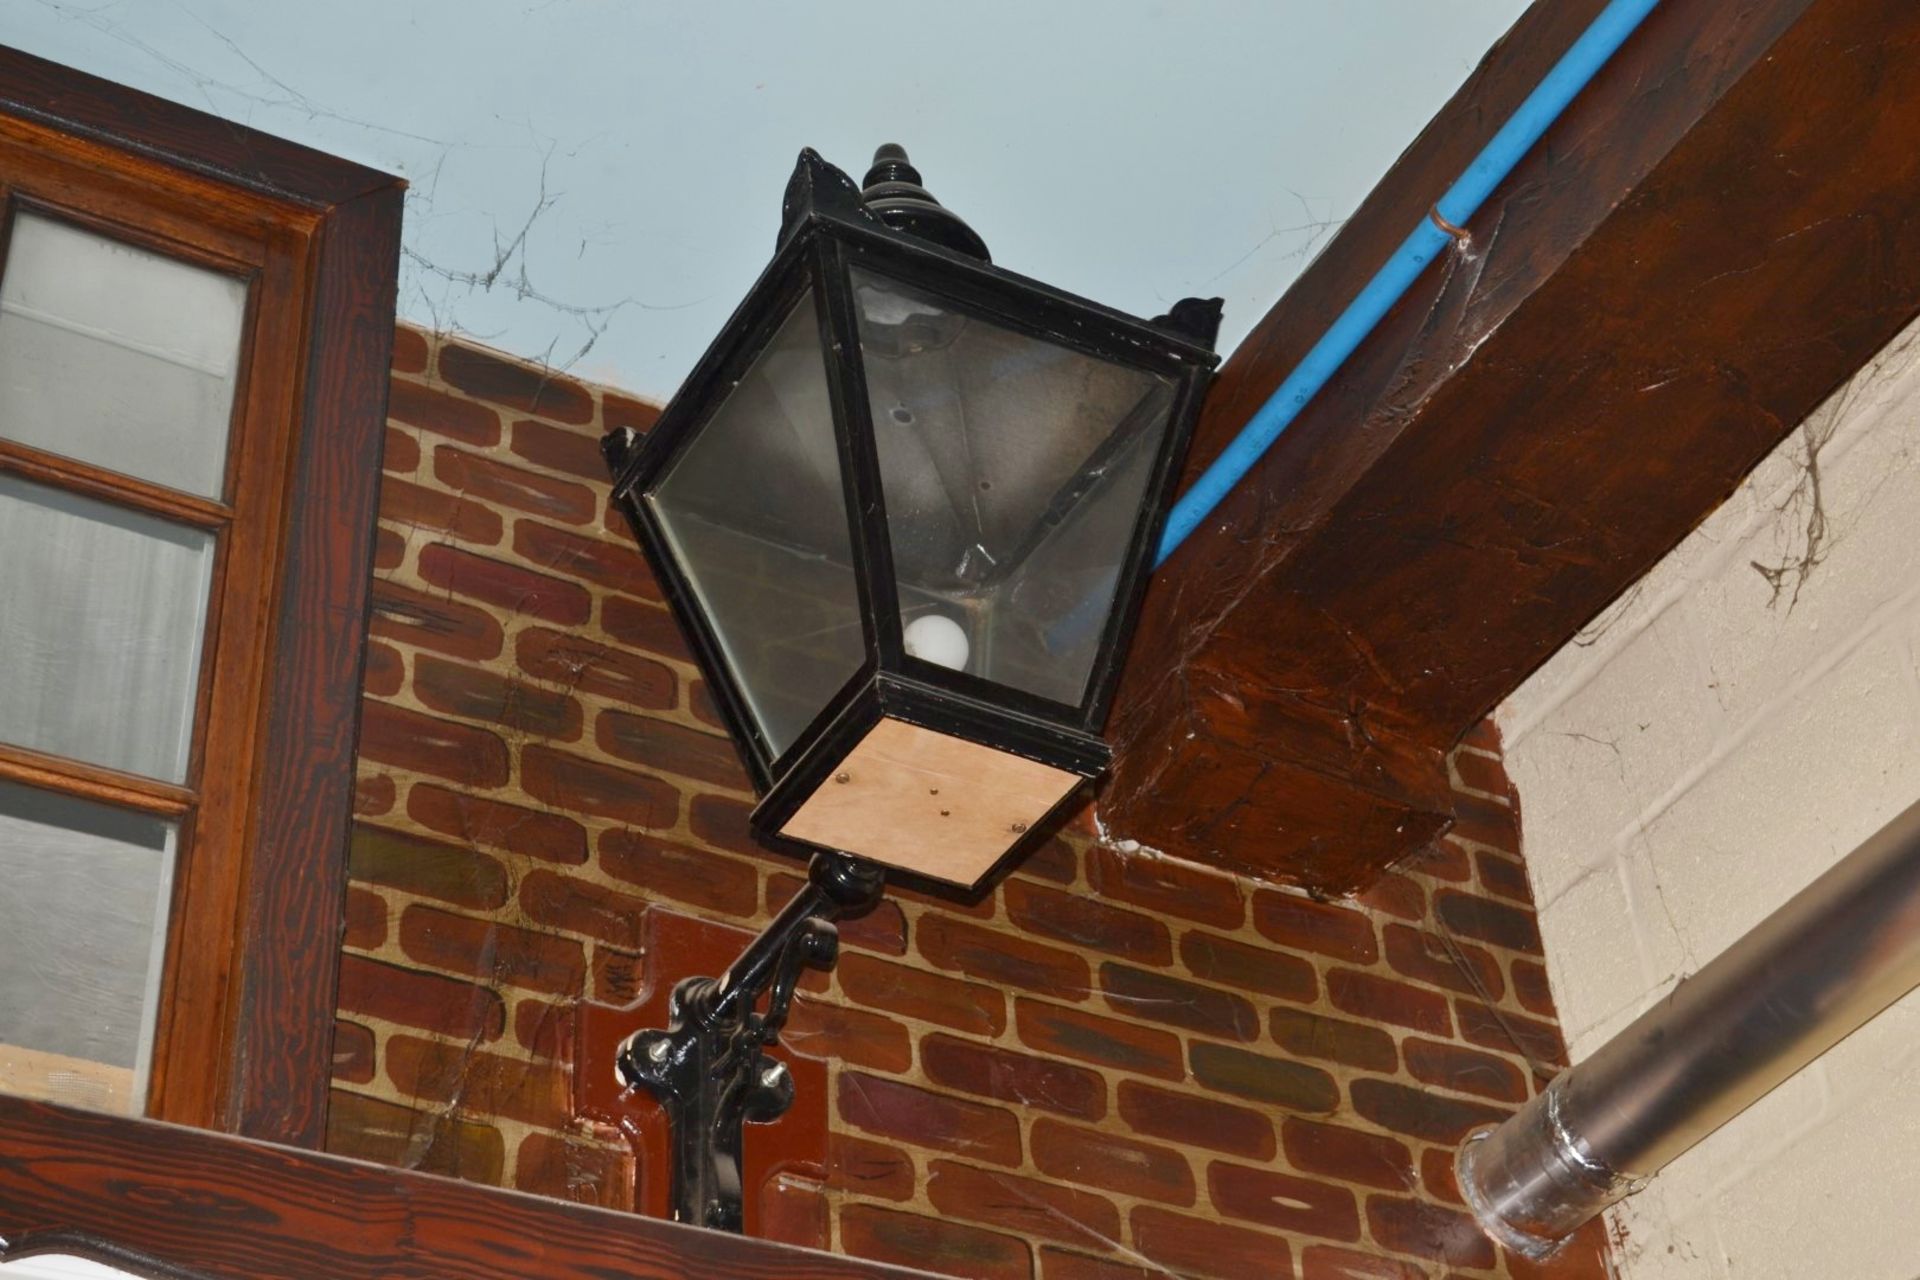 1 x Victorian Style Wall Lantern Light Fitting - Large Size in Black - Ref BB670 GF - CL351 - - Image 2 of 3